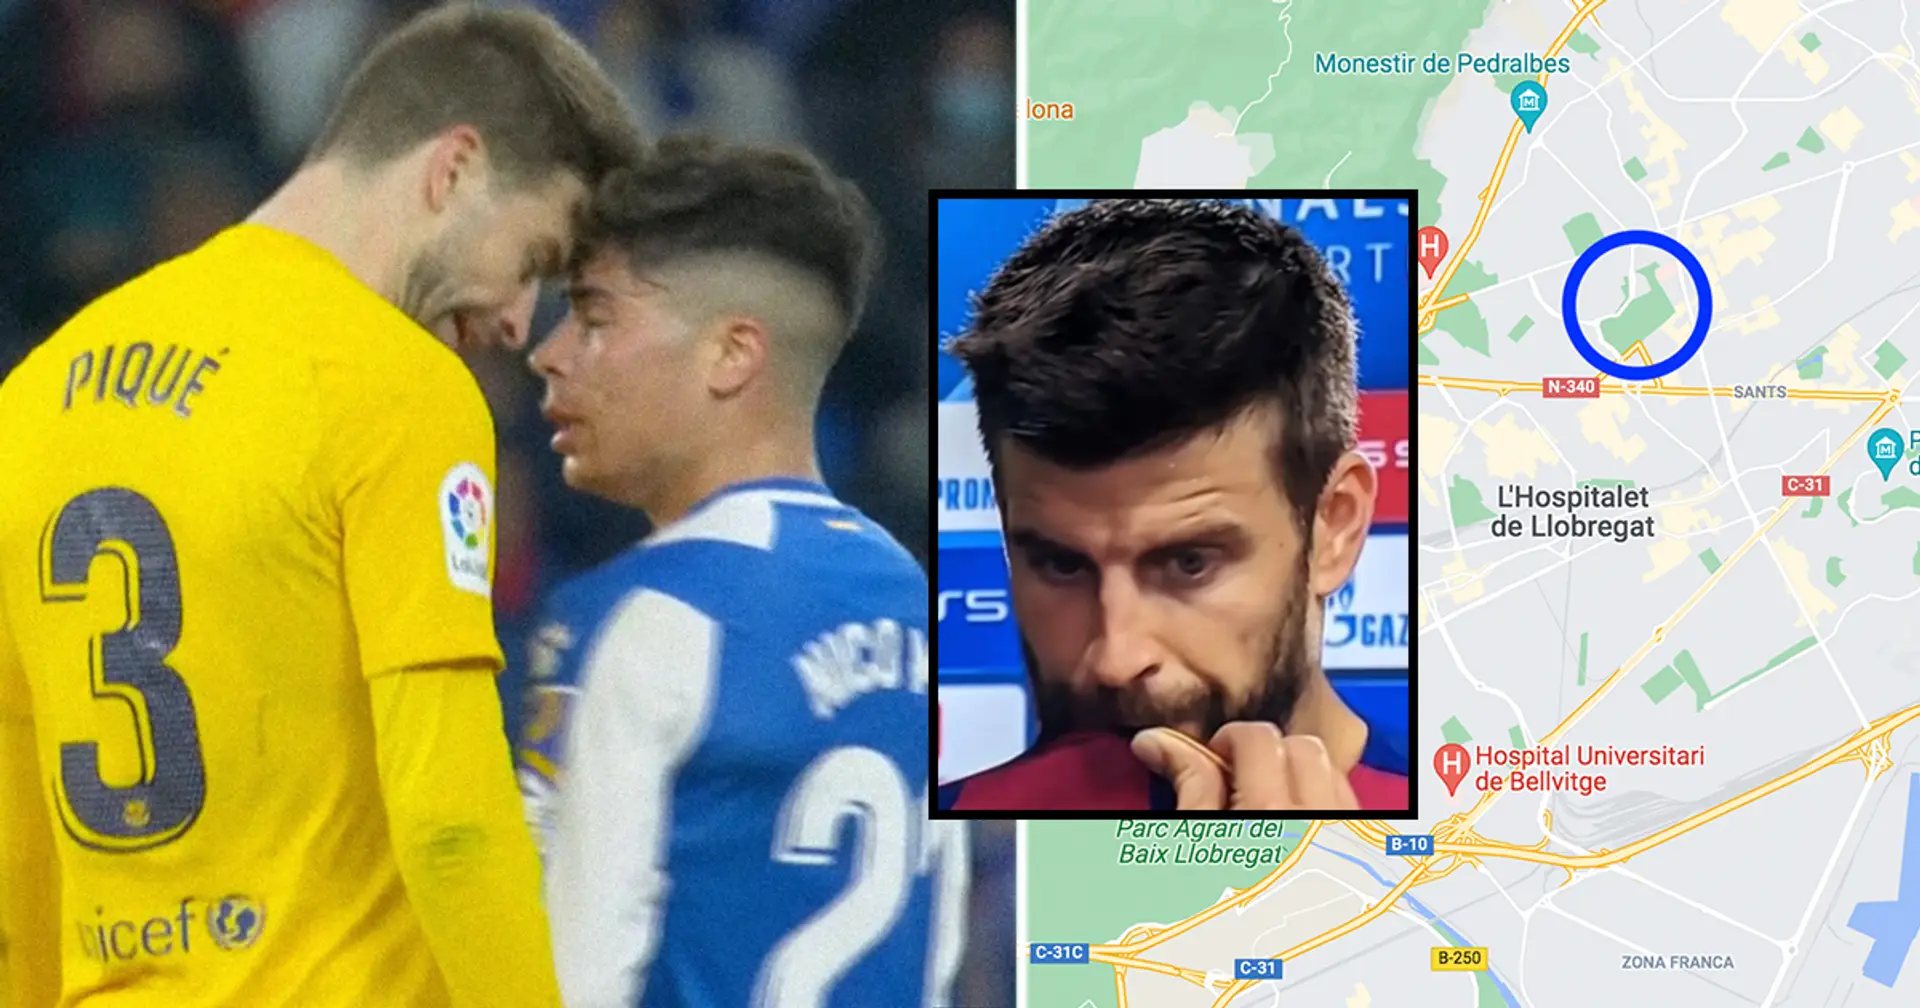 Why Espanyol fans heavily boo Pique explained